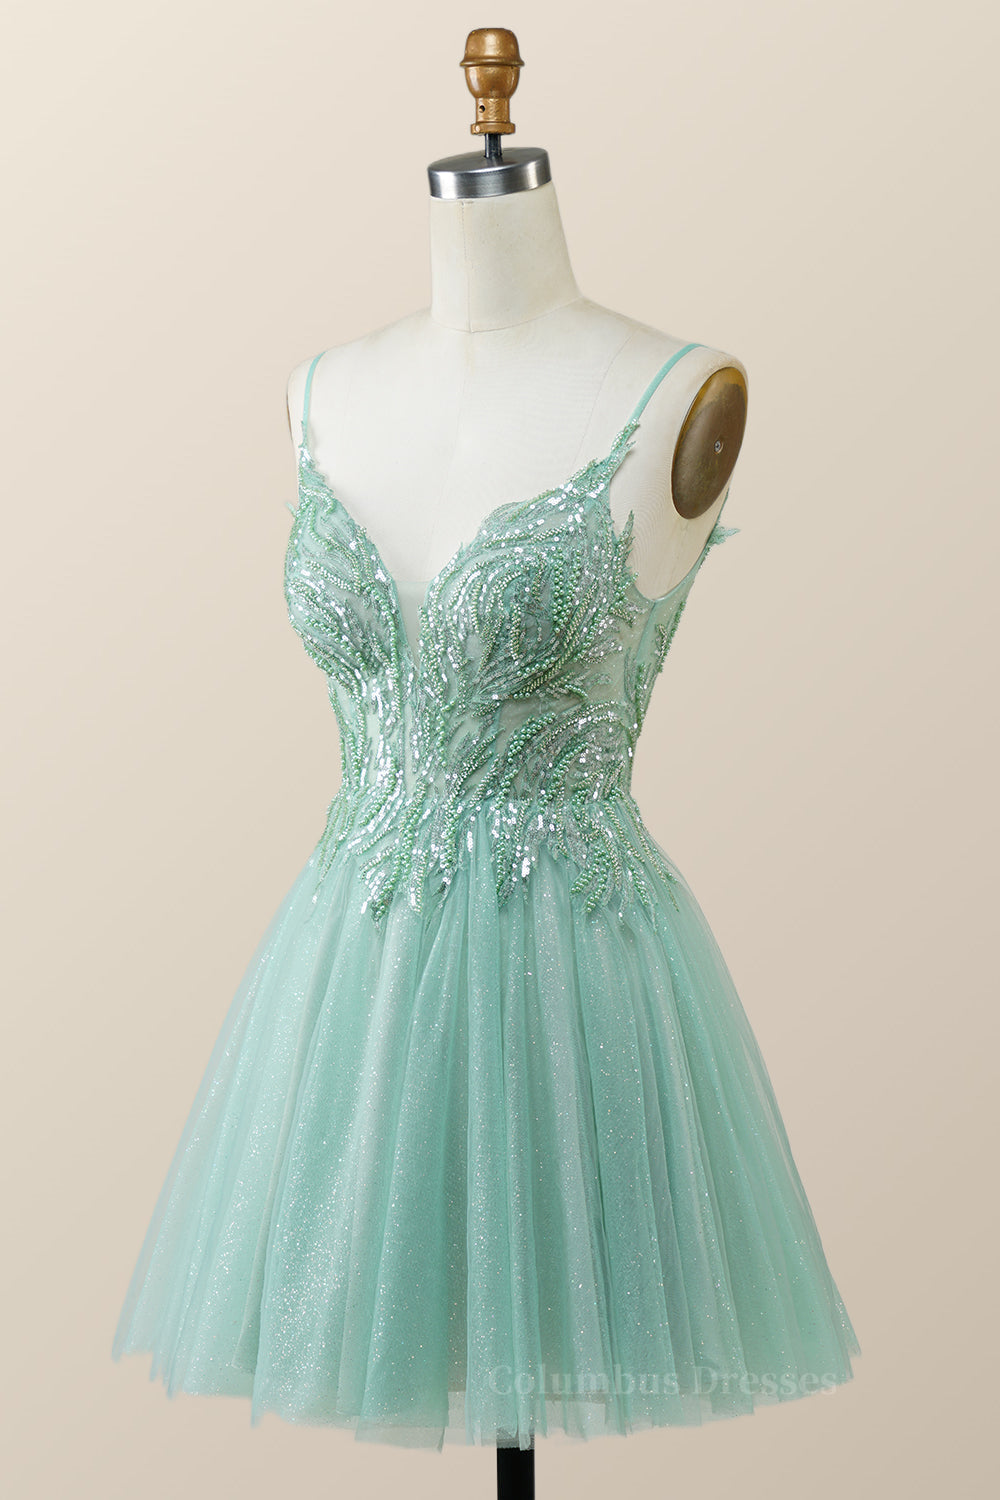 Prom Dresses For Teens Long, Straps Mint Green Tulle A-line Short Homecoming Dress